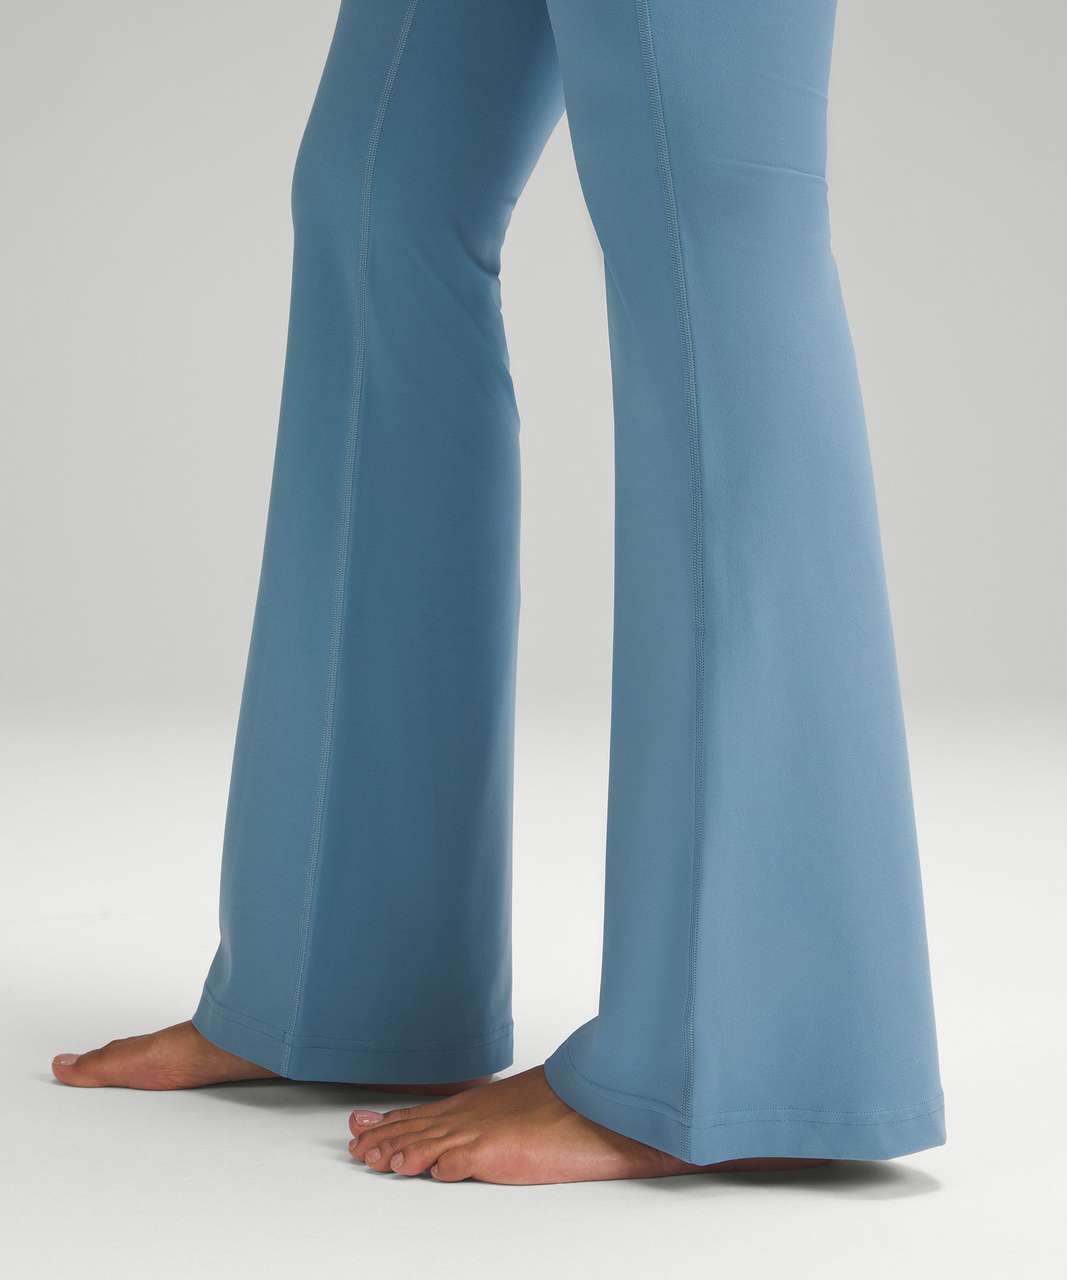 Lululemon Groove Pant Flare Super High-Rise *Nulu in Tidewater Teal